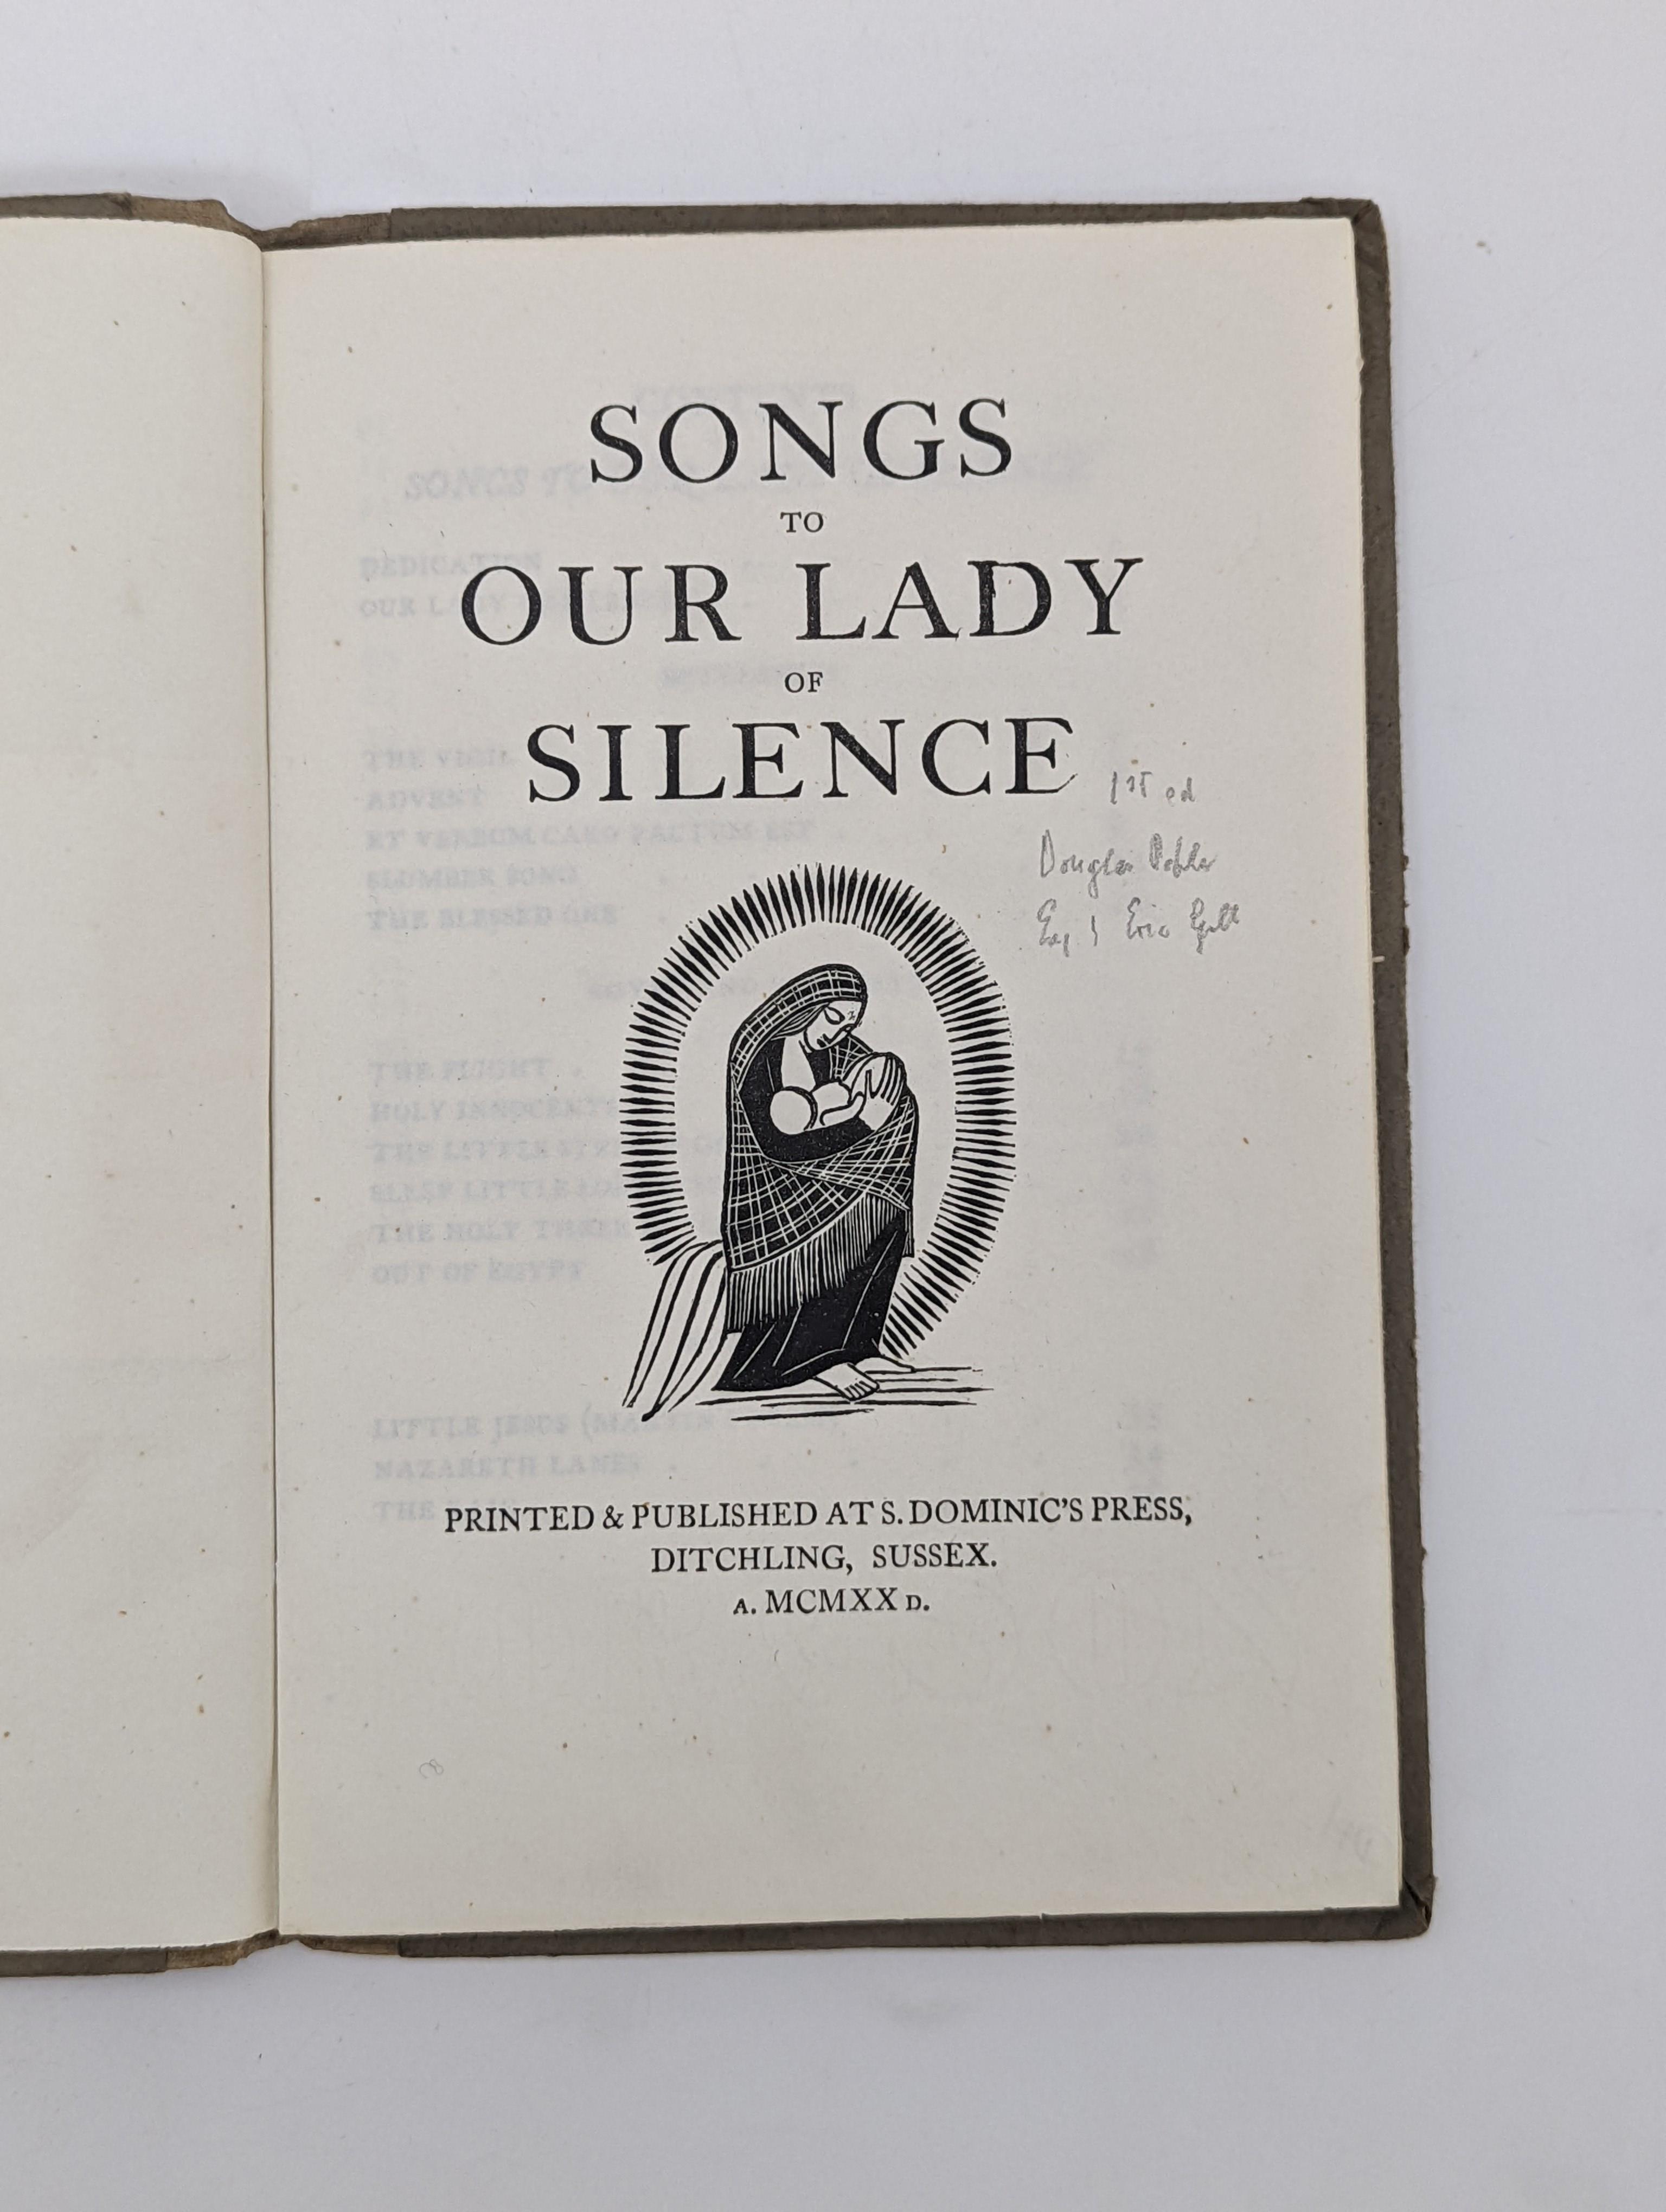 Gill, Eric (illustrator) - Pepler, Hilary Douglas Clark - Nisi Dominus, with 17 wood-engravings, 8vo, original cloth-backed boards, St. Dominic’s Press, Ditchling, 1919 and Woellwarth, Mary - Songs of Our Lady of Silence